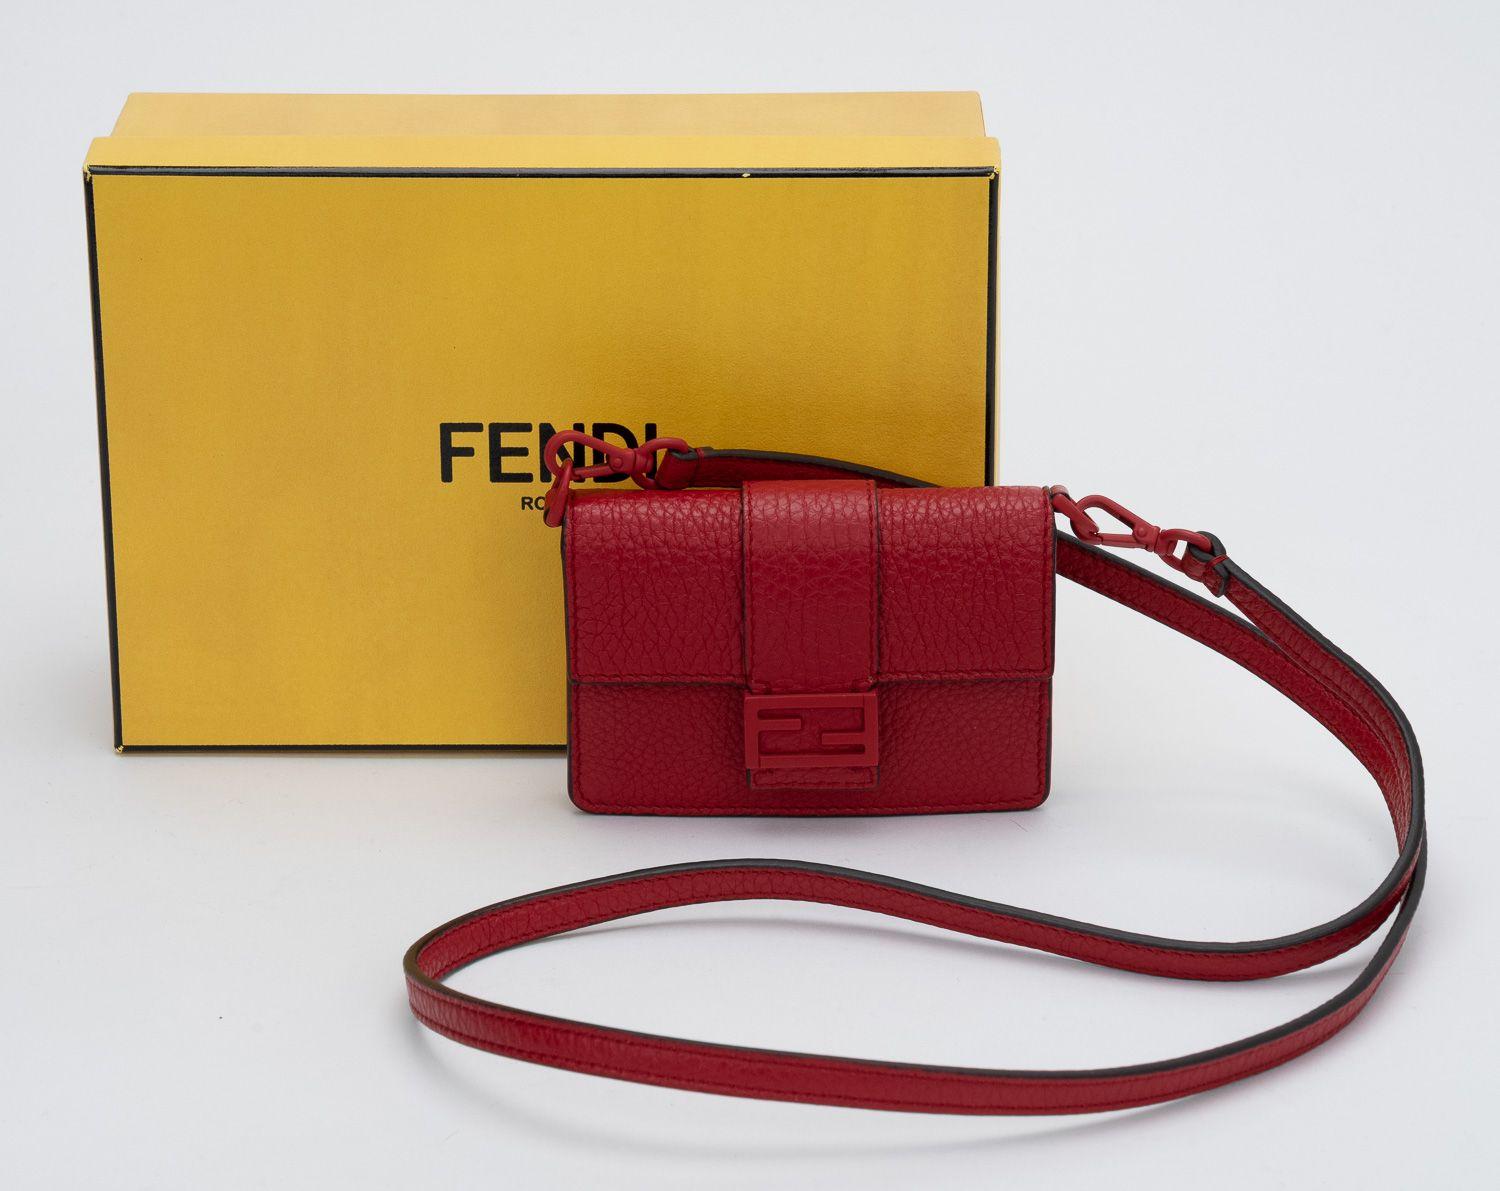 Fendi micro baguette in red pebbled leather. Brand new in unworn condition. Fits credit cards and keys .Shoulder drop 18.5